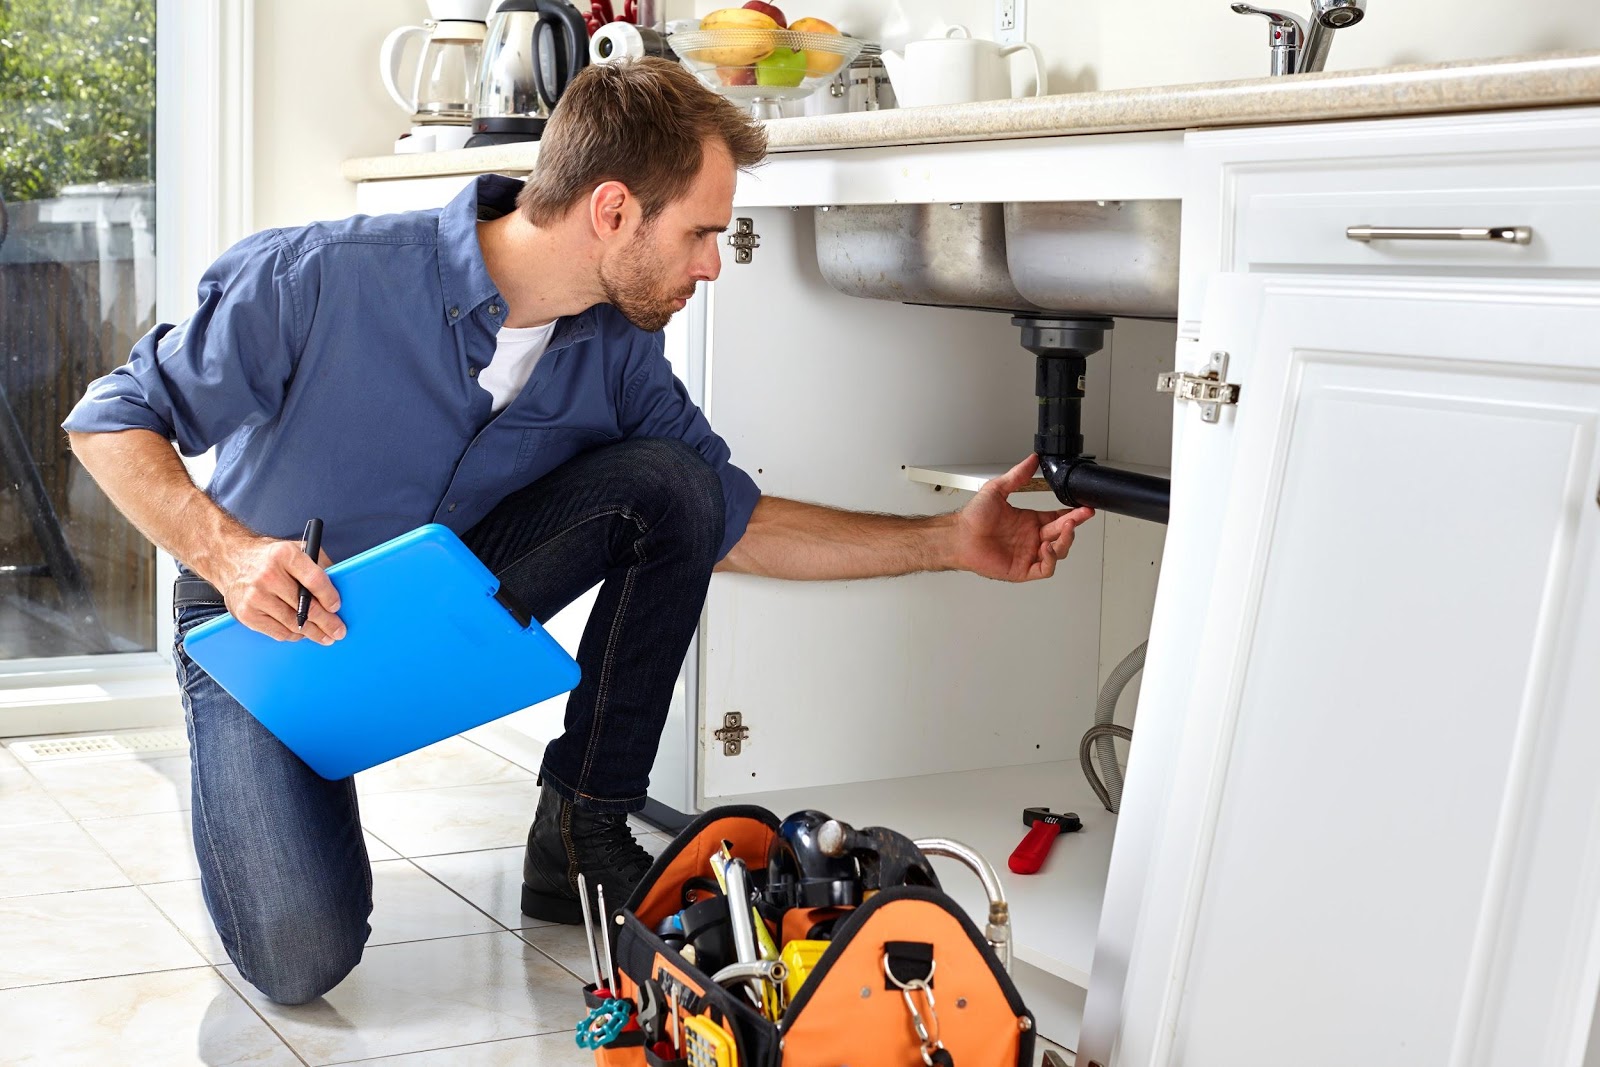 What Can You Do to Address Plumbing Issues Effectively?